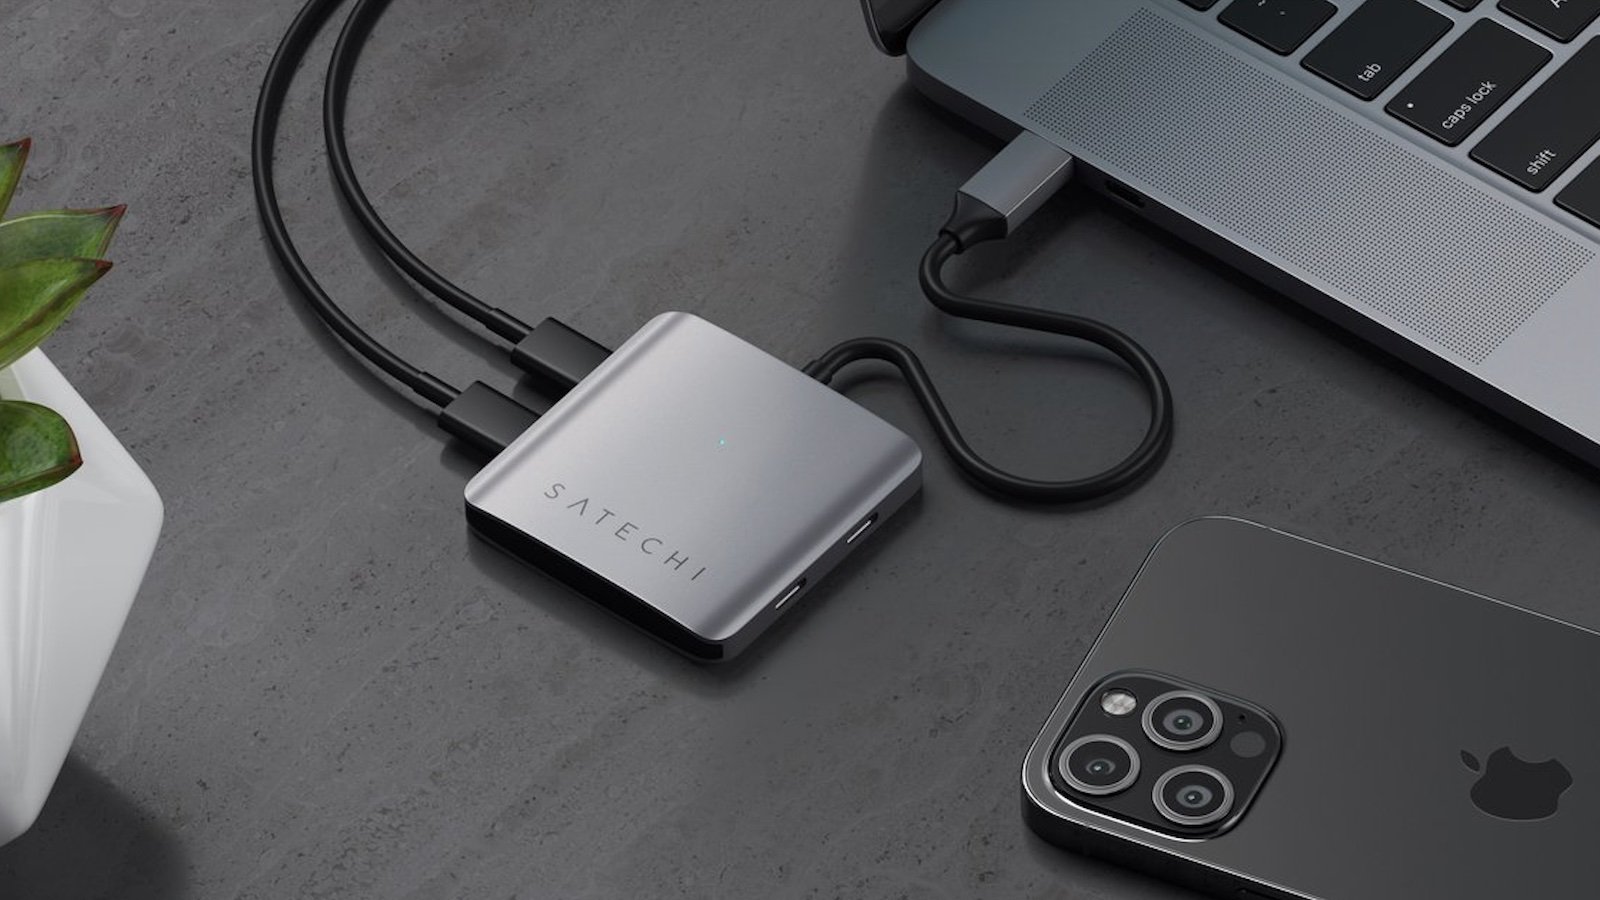 Satechi 4-Port USB-C Hub comes with USB-C Gen 1 data ports for easy backups and more